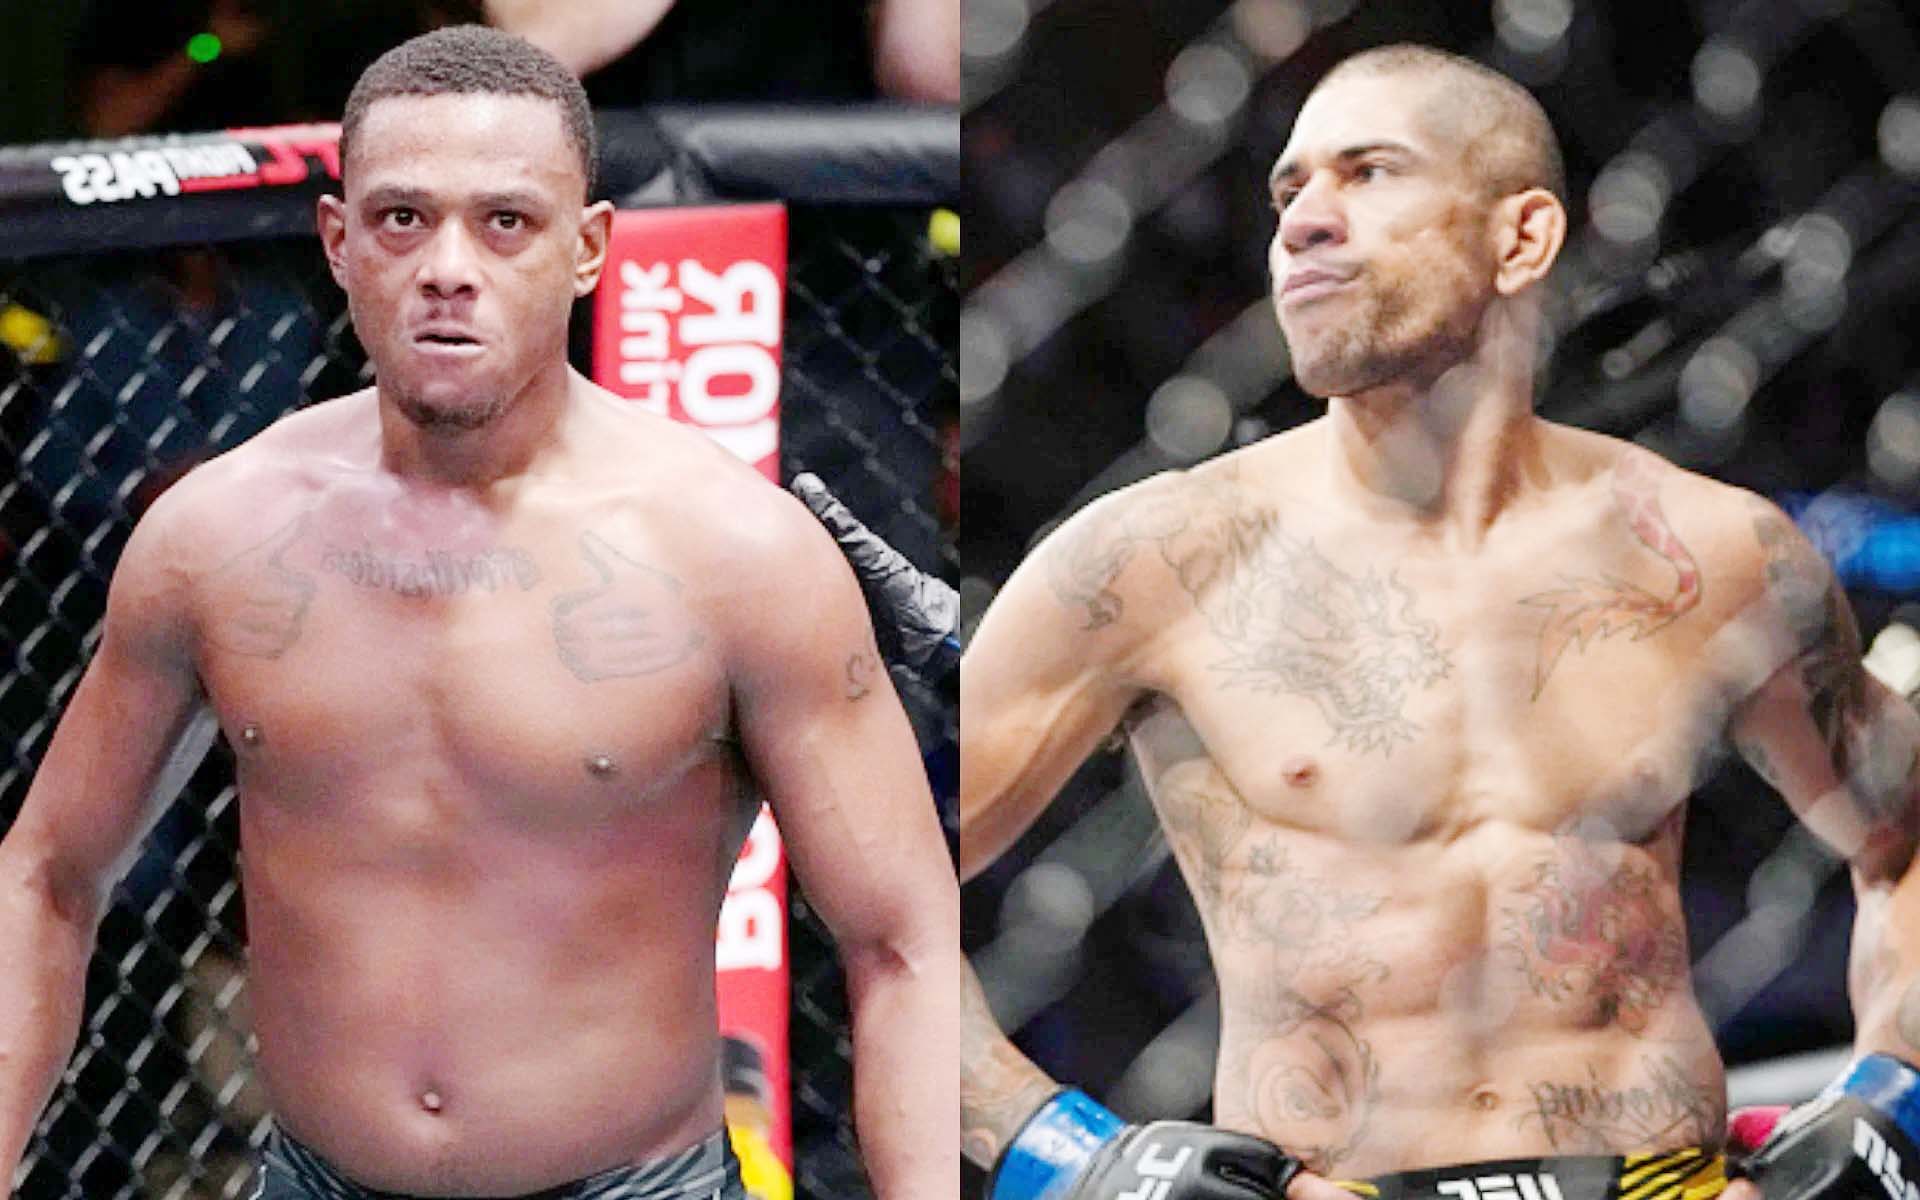 Clash of Titans: Pereira vs Hill at UFC Fight Night. Two fierce fighters in action.